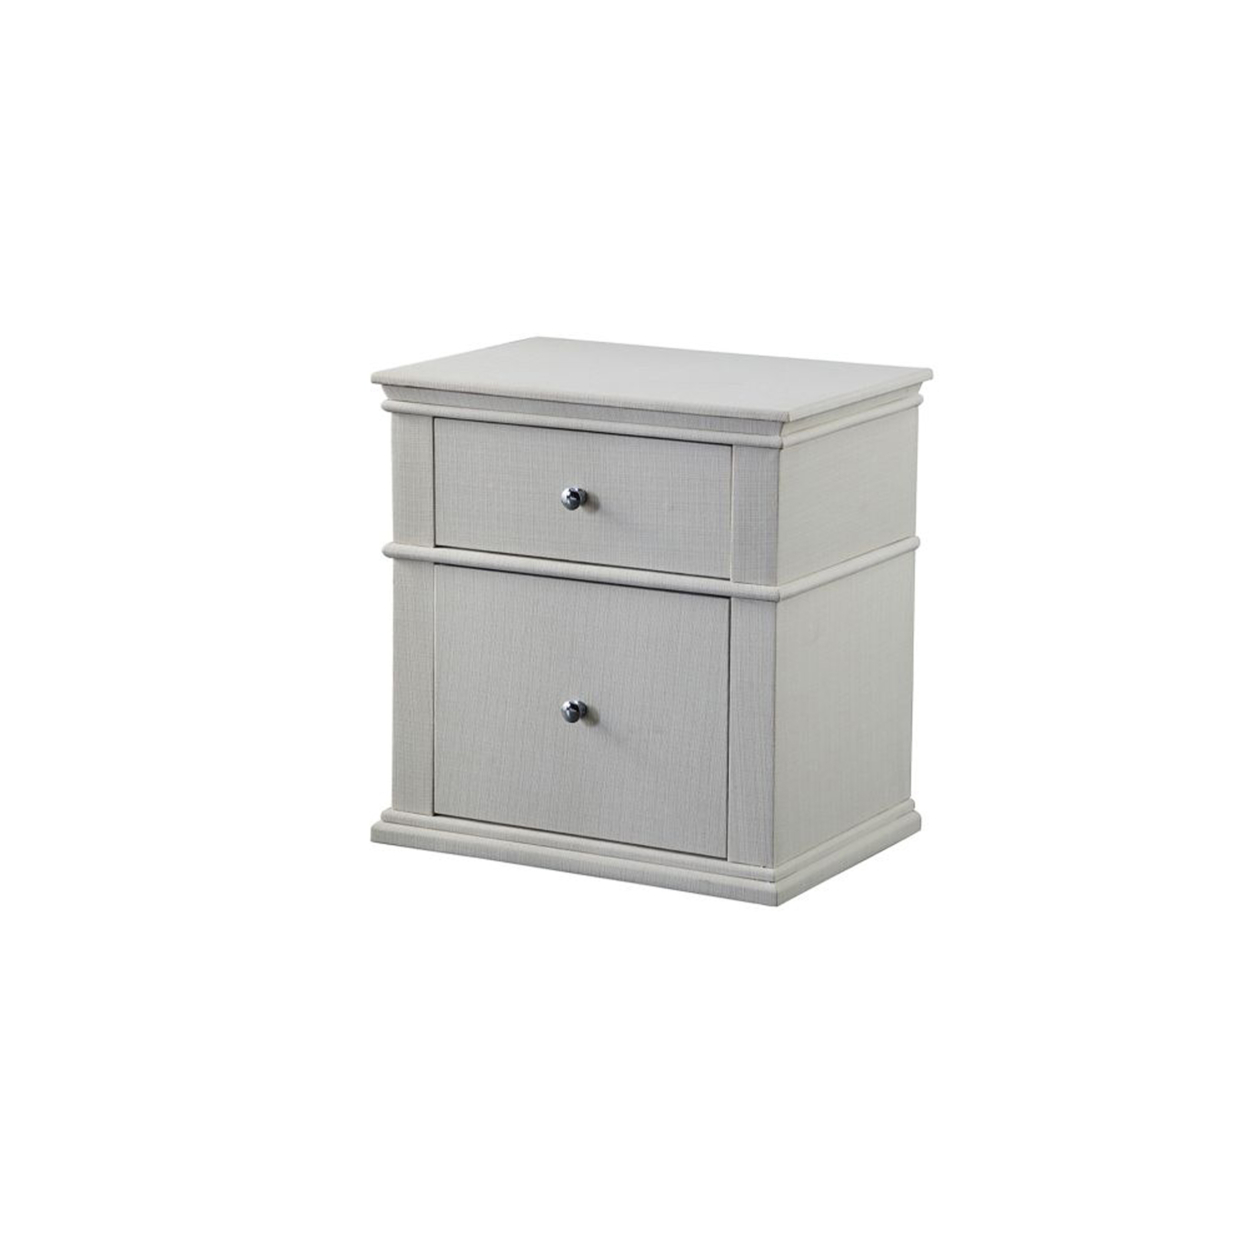 Fabric Upholstered Wooden Nightstand With Two Drawers, White- Saltoro Sherpi